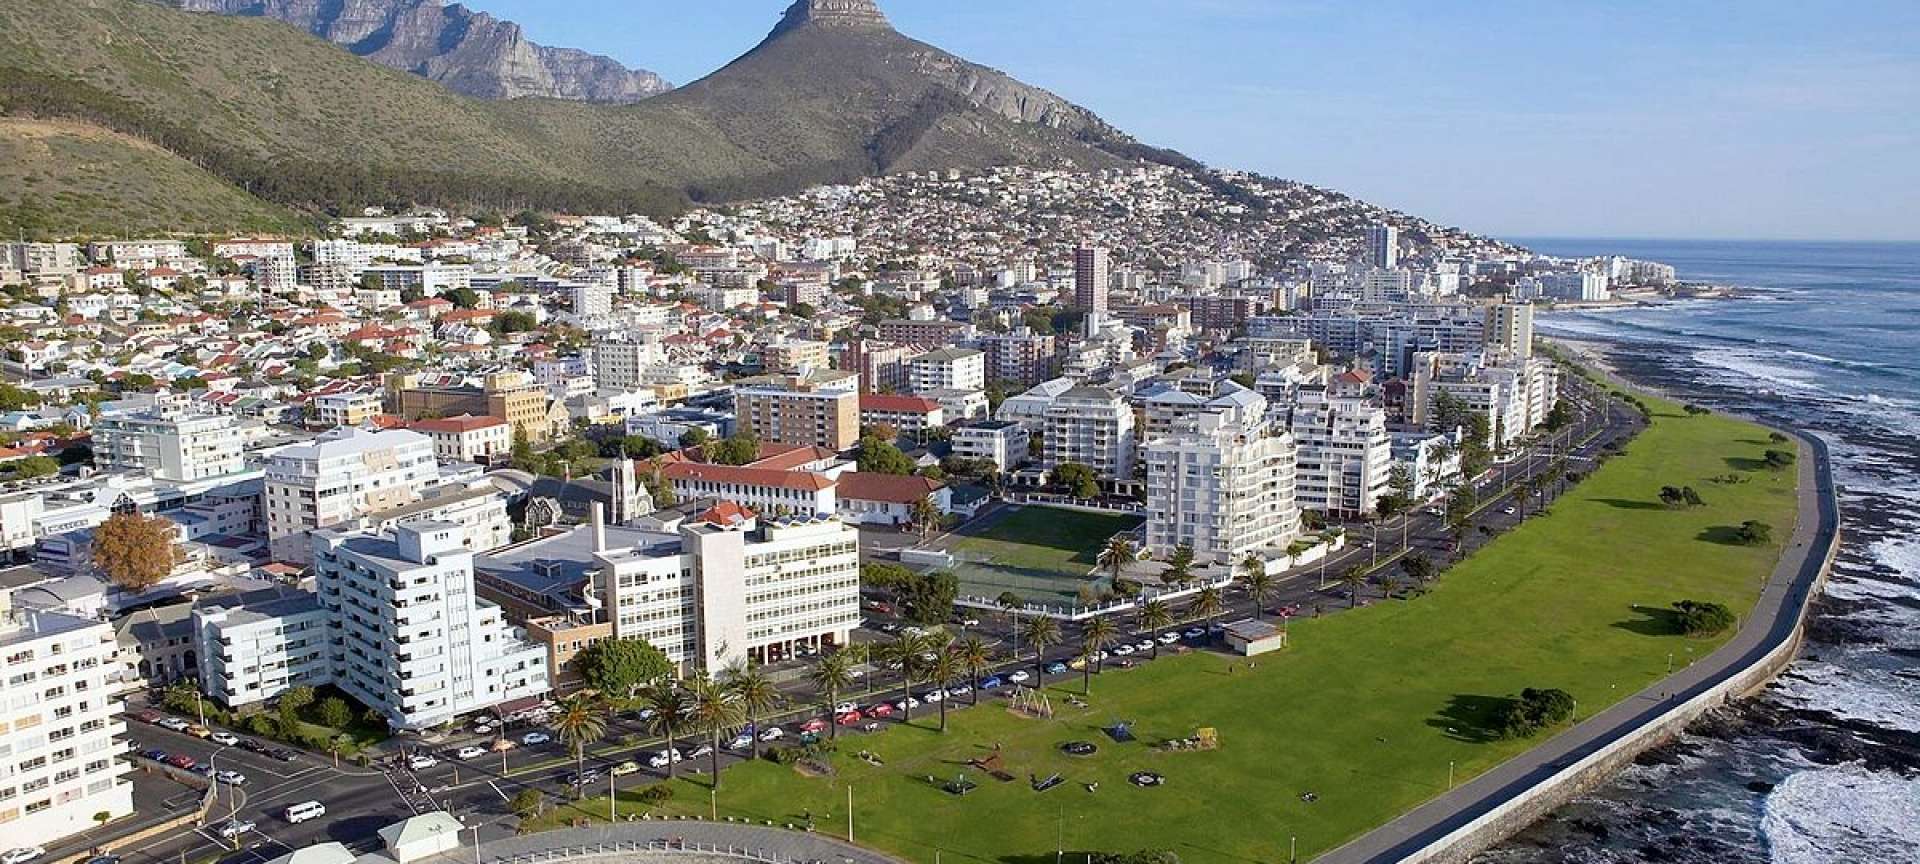 The Sea Point Promenade is somewhat of an institution for Capetonians and visitors alike.